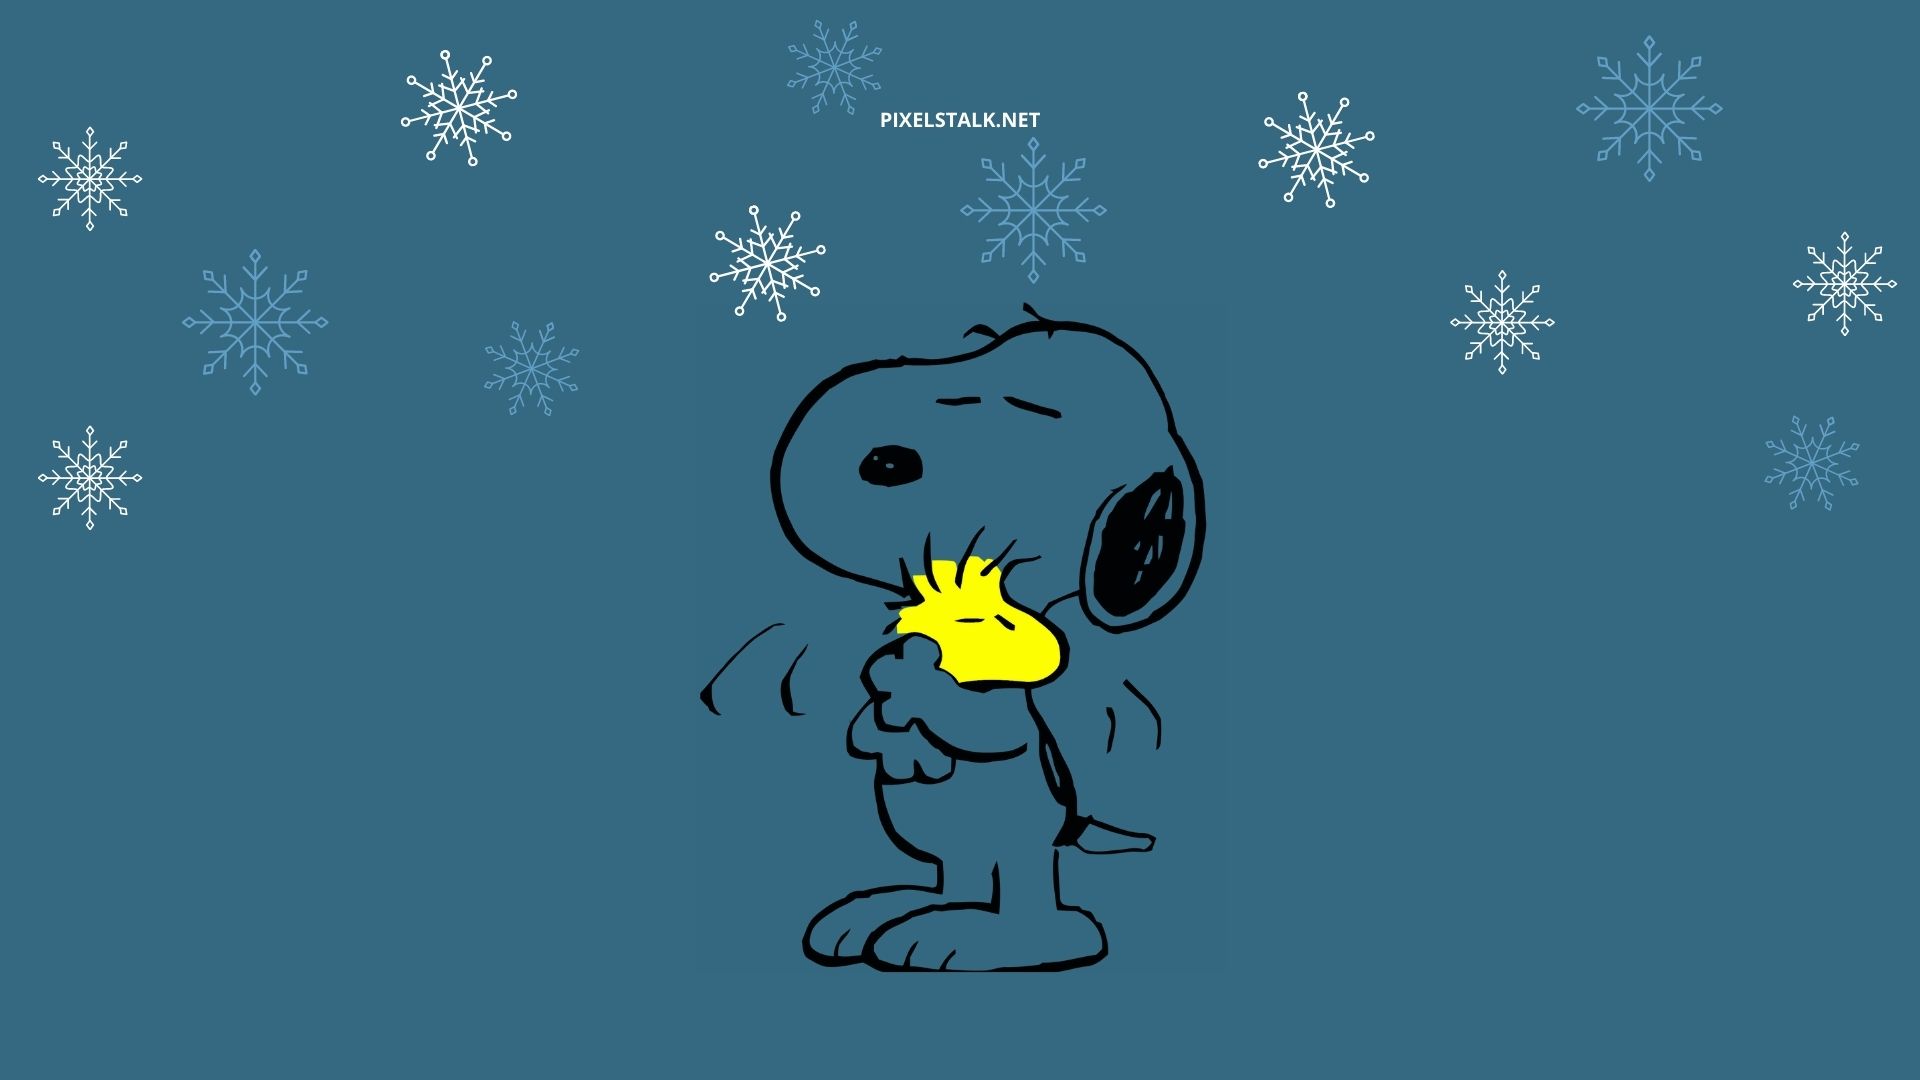 Snoopy Winter Wallpapers Free download 